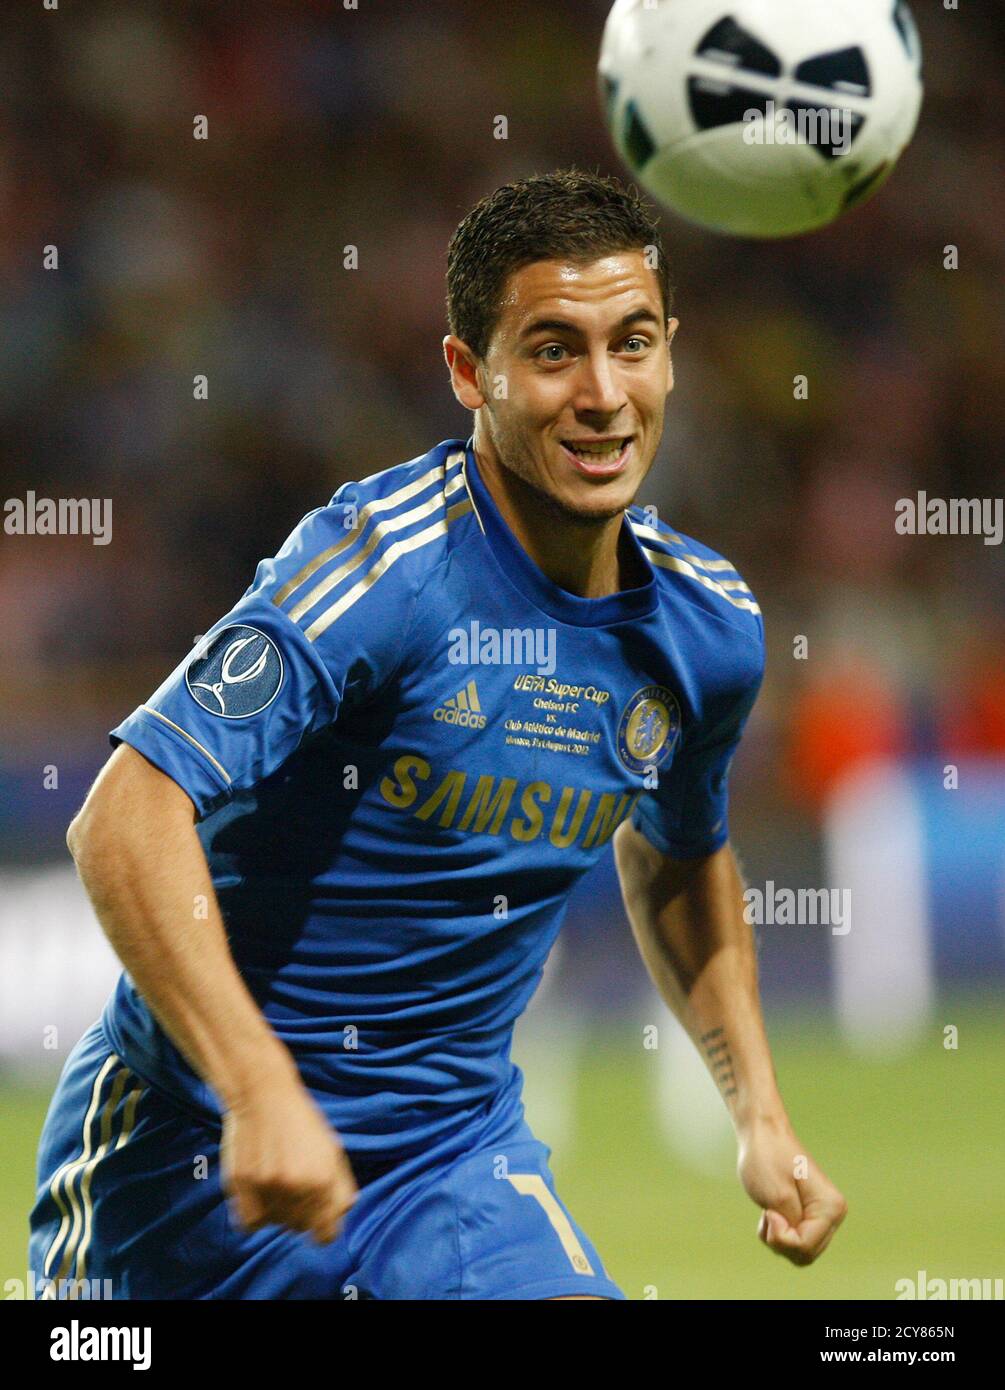 Chelsea's Eden Hazard chases the ball during their UEFA Super Cup match  against Atletico Madrid at Louis II stadium in Monaco, August 31, 2012.  REUTERS/Philippe Laurenson (MONACO - Tags: SPORT SOCCER Stock